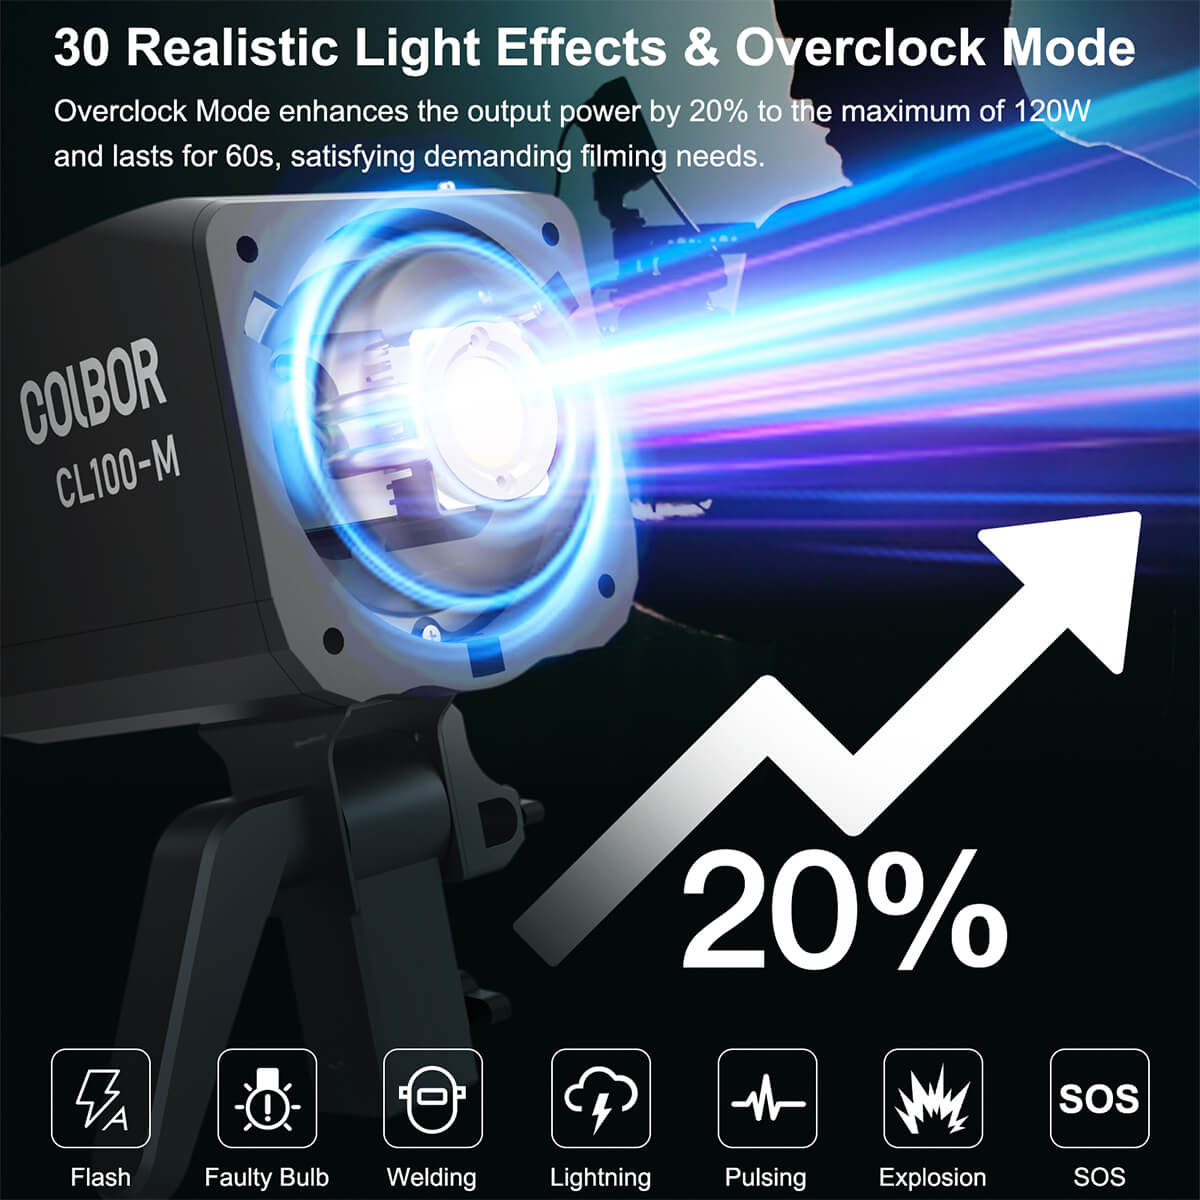 COLBOR CL100M boasts 30 lighting effects and overclock mode to enhance the output power by 20% to the maximum of 120W and last for 60s